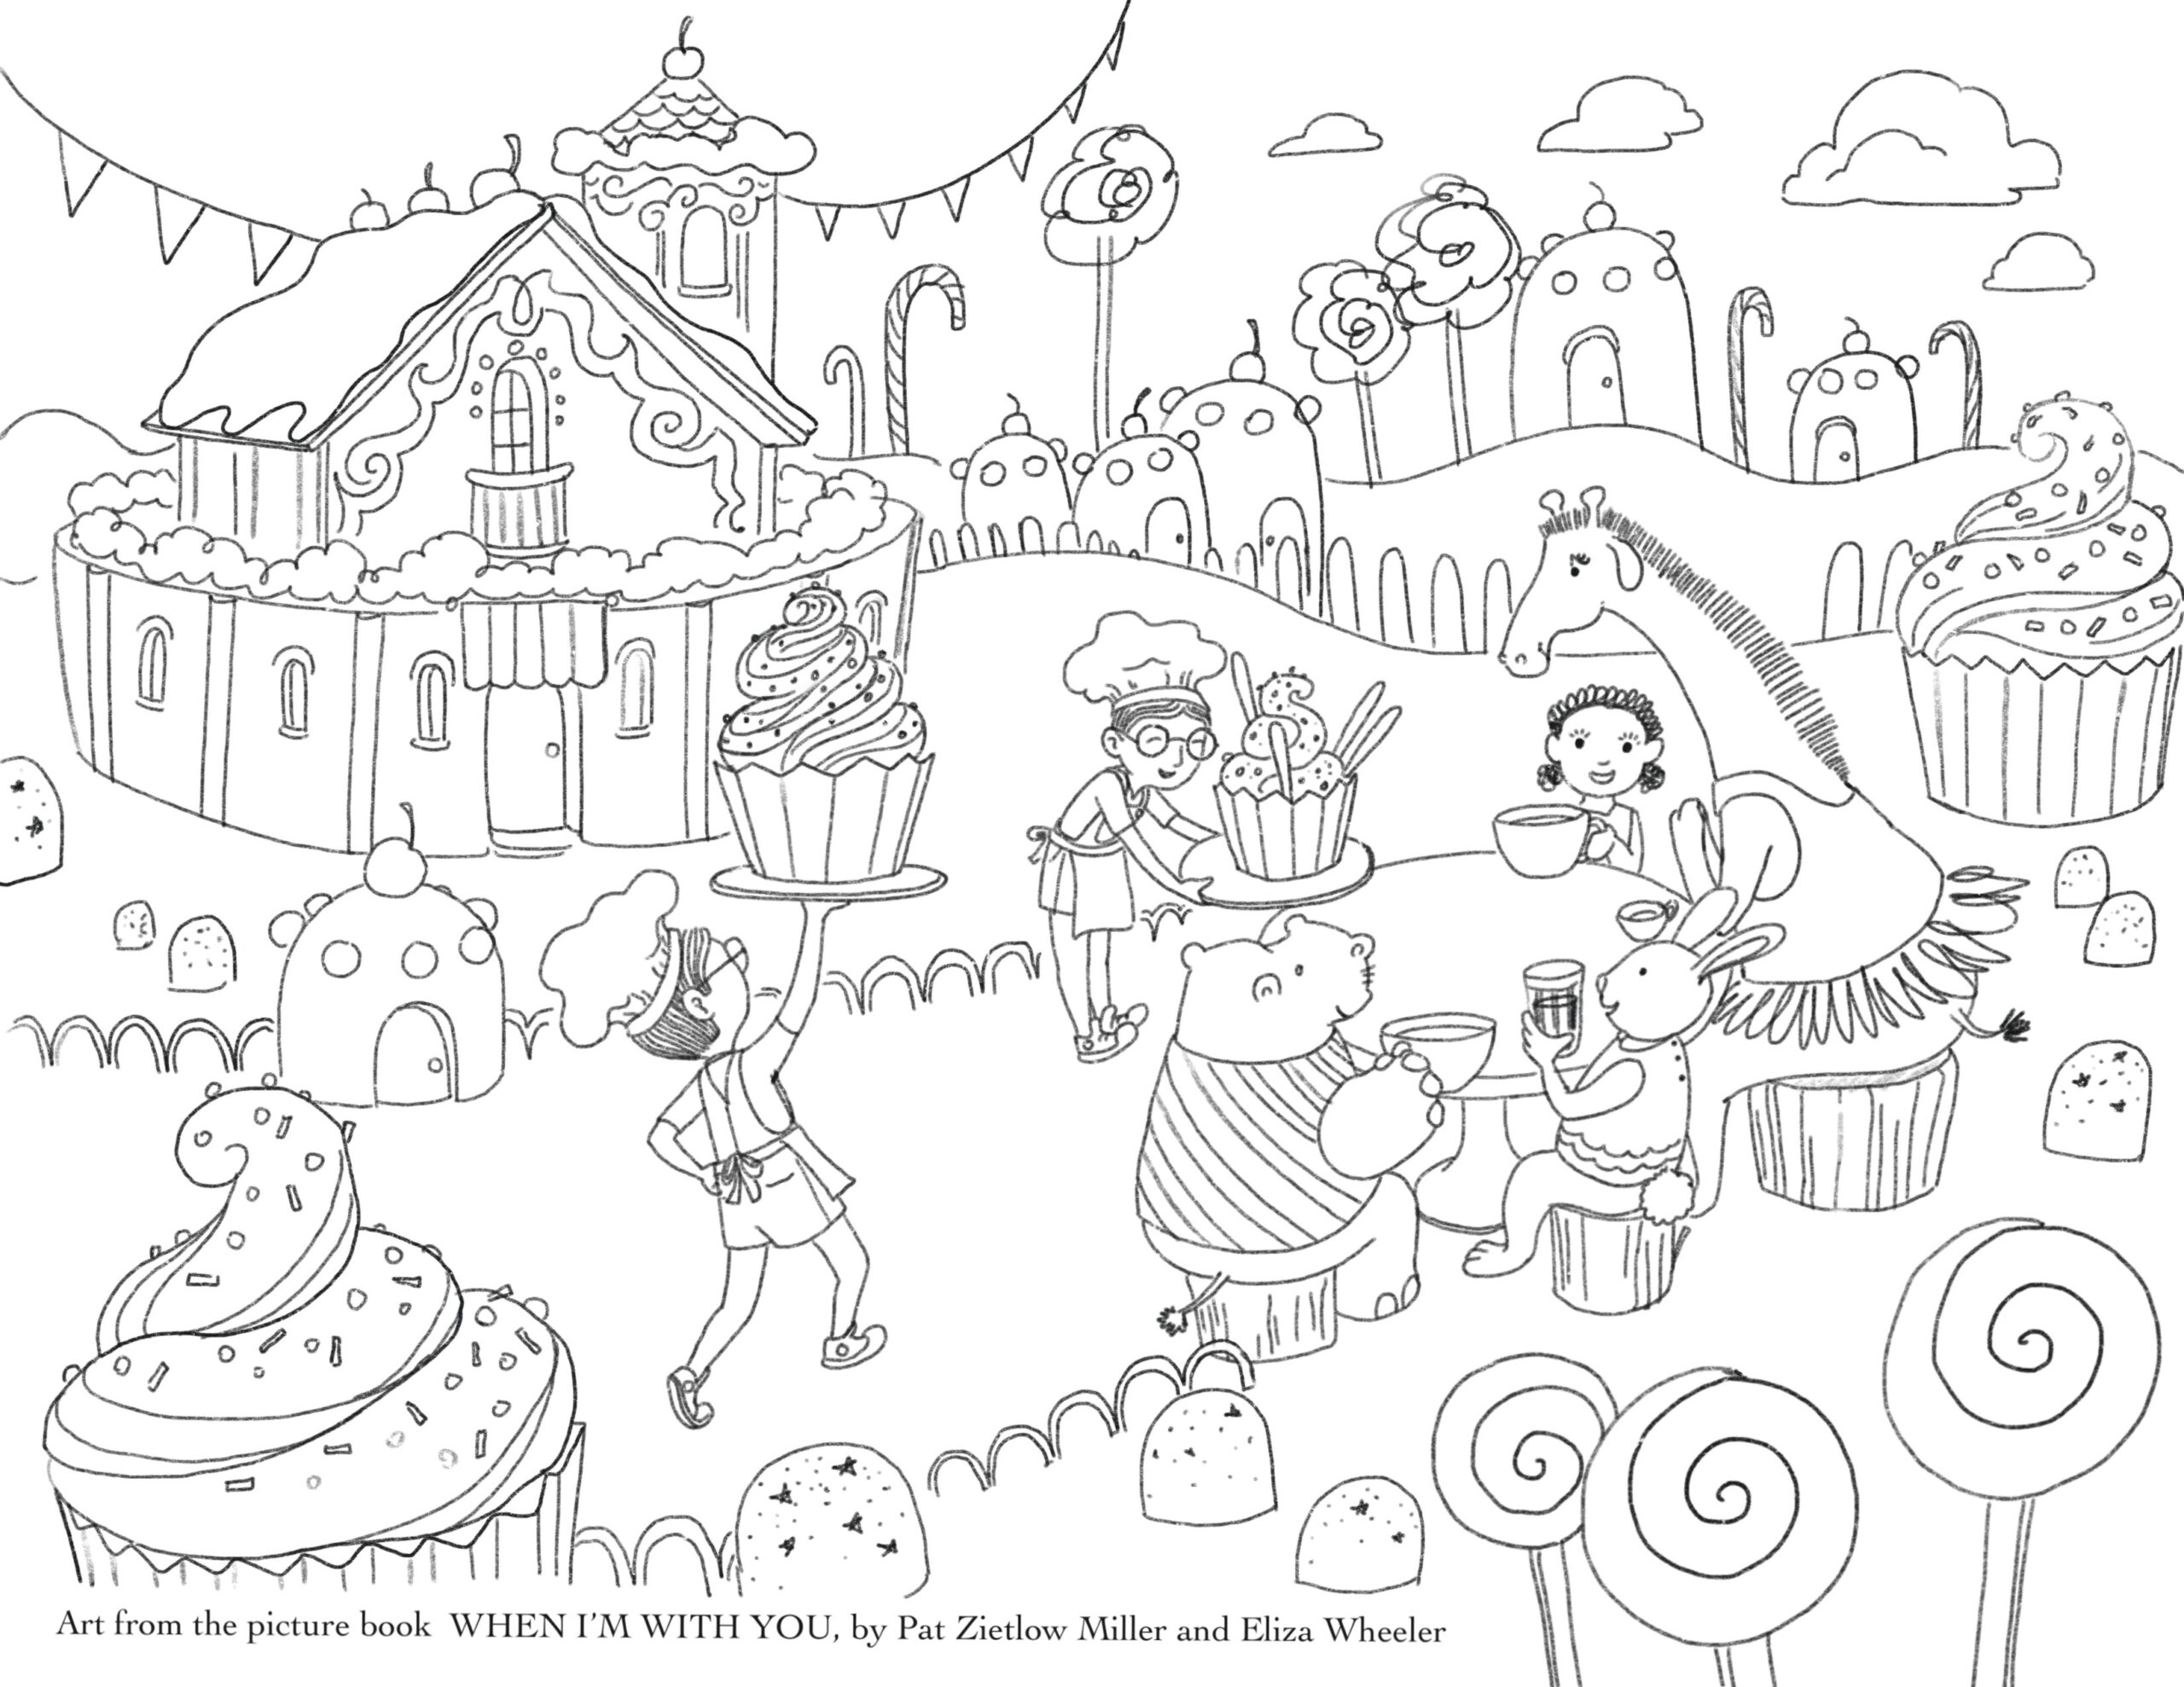 When im with you â free coloring sheets â wheeler studio